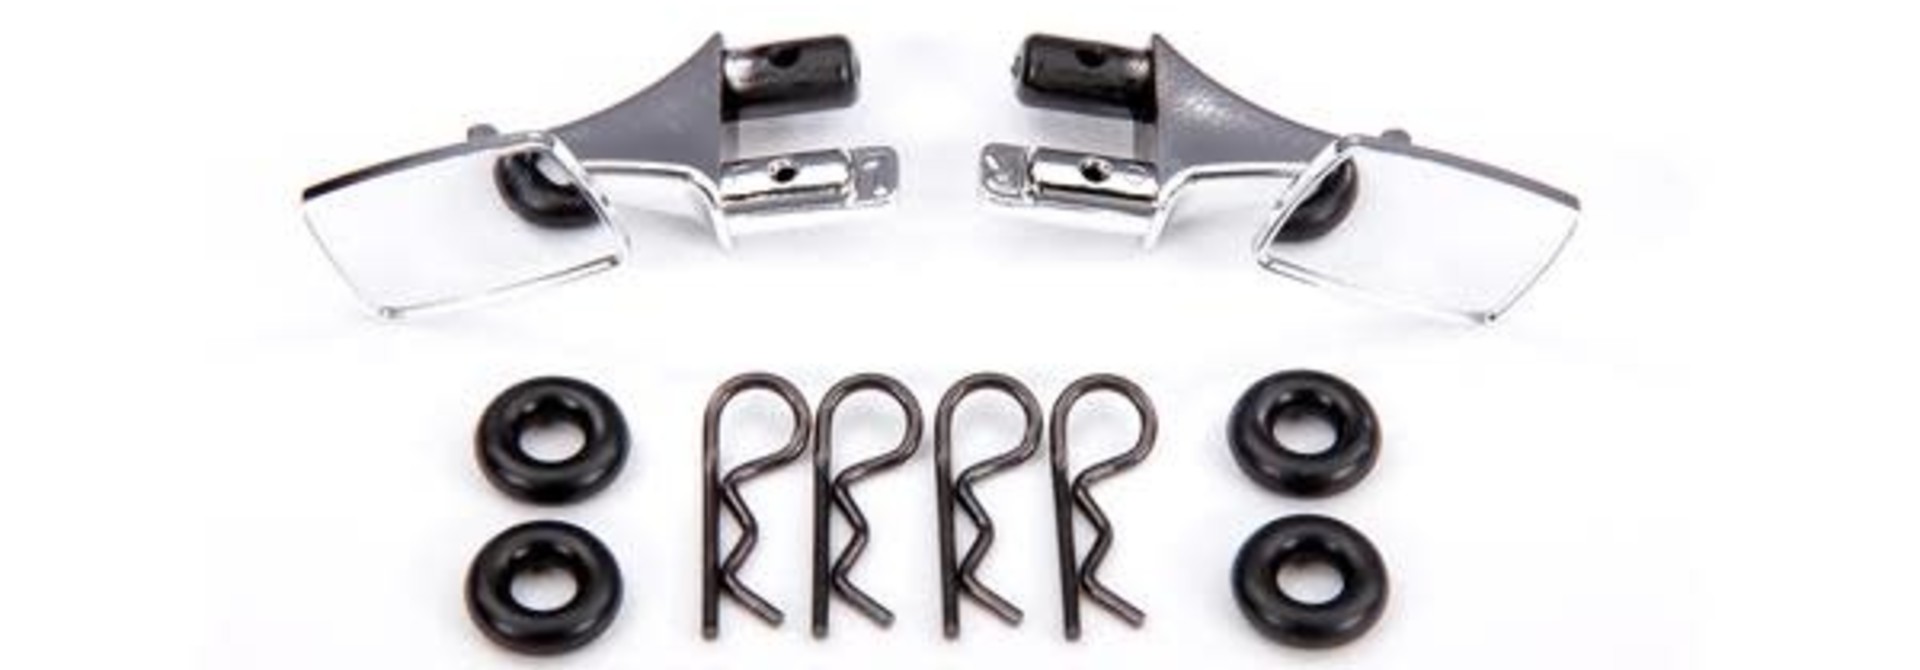 Mirrors, side, chrome (left & right)/ o-rings (4)/ body clips (4) (fits #9111 body)